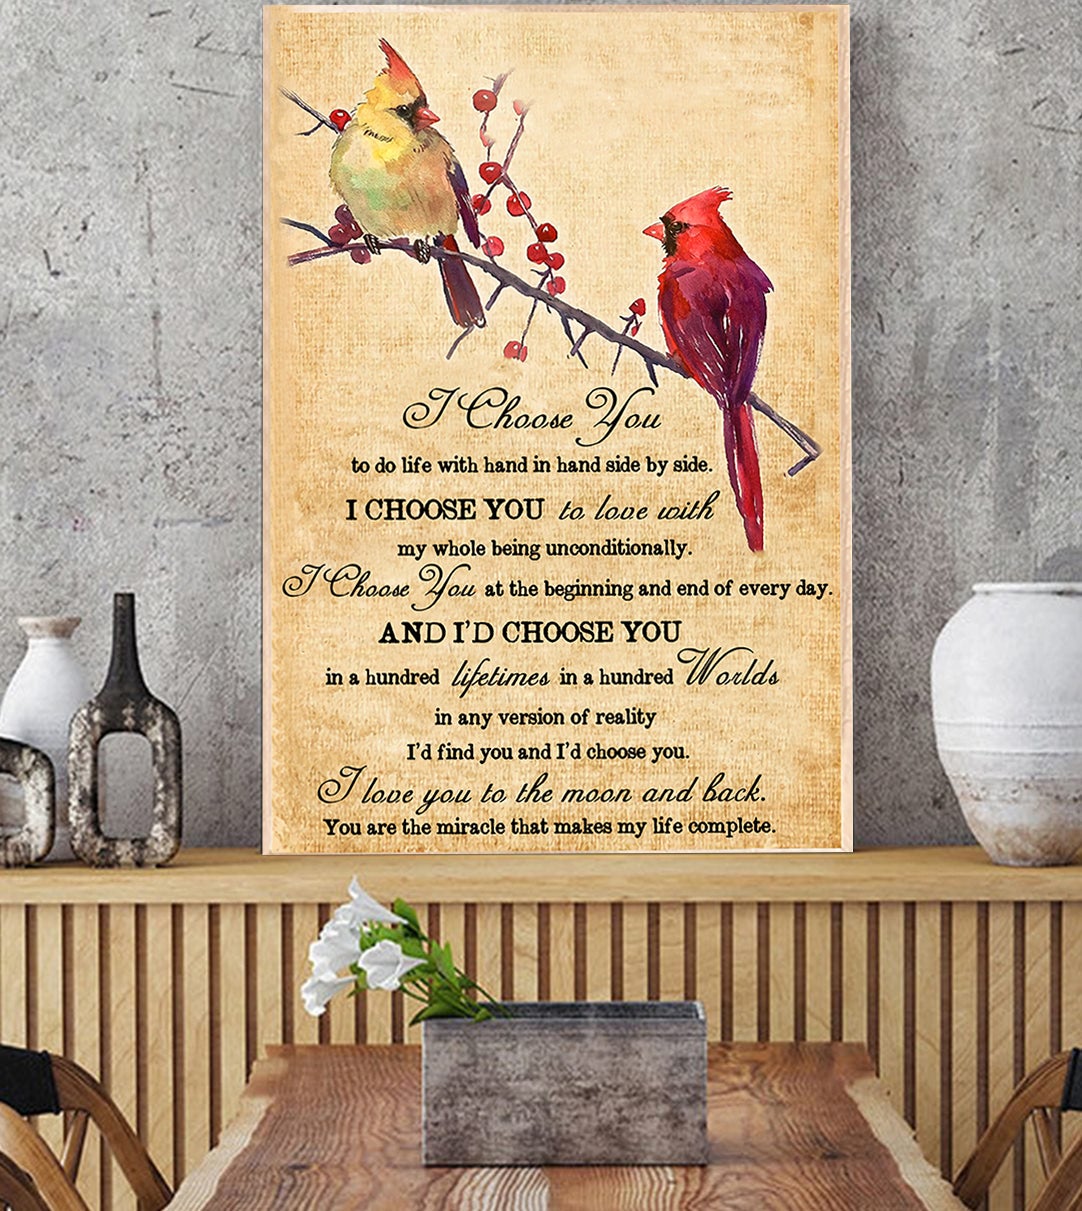 (Xh1109) Bird Poster – I Choose You To Do Life With Hand In Hand Side By Side…I Love You To The Moon And Back- Gift Poster